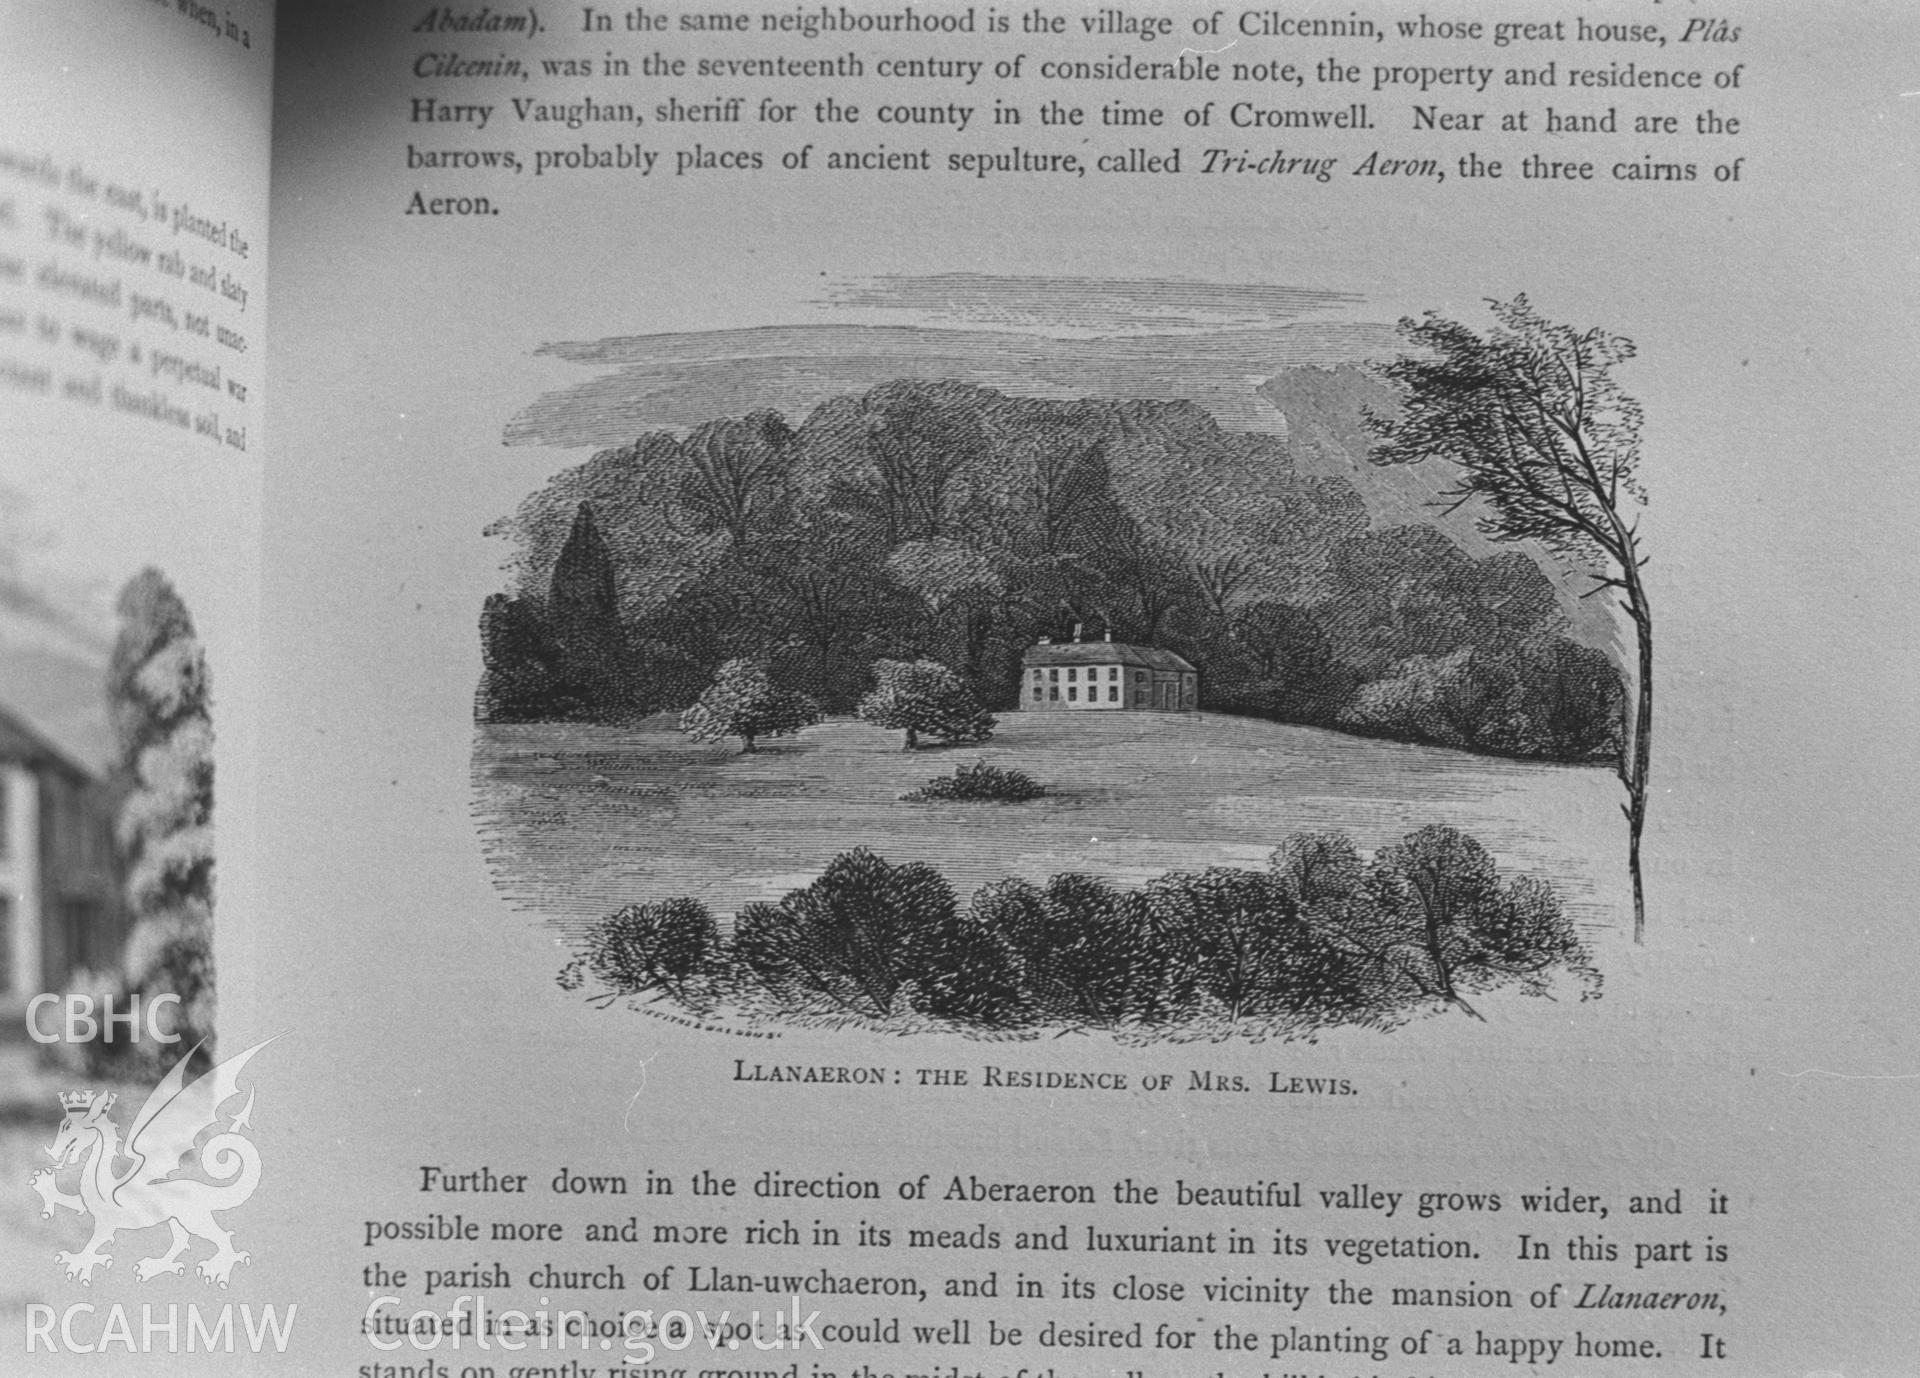 Drawing entitled 'Llanaeron: The residence of Mrs. Lewis.' From 'Annals of the counties and county families of Wales' vol 1 by Thomas Nicholas, 1872. Photographed by Arthur O. Chater in January 1968 for his own private research.